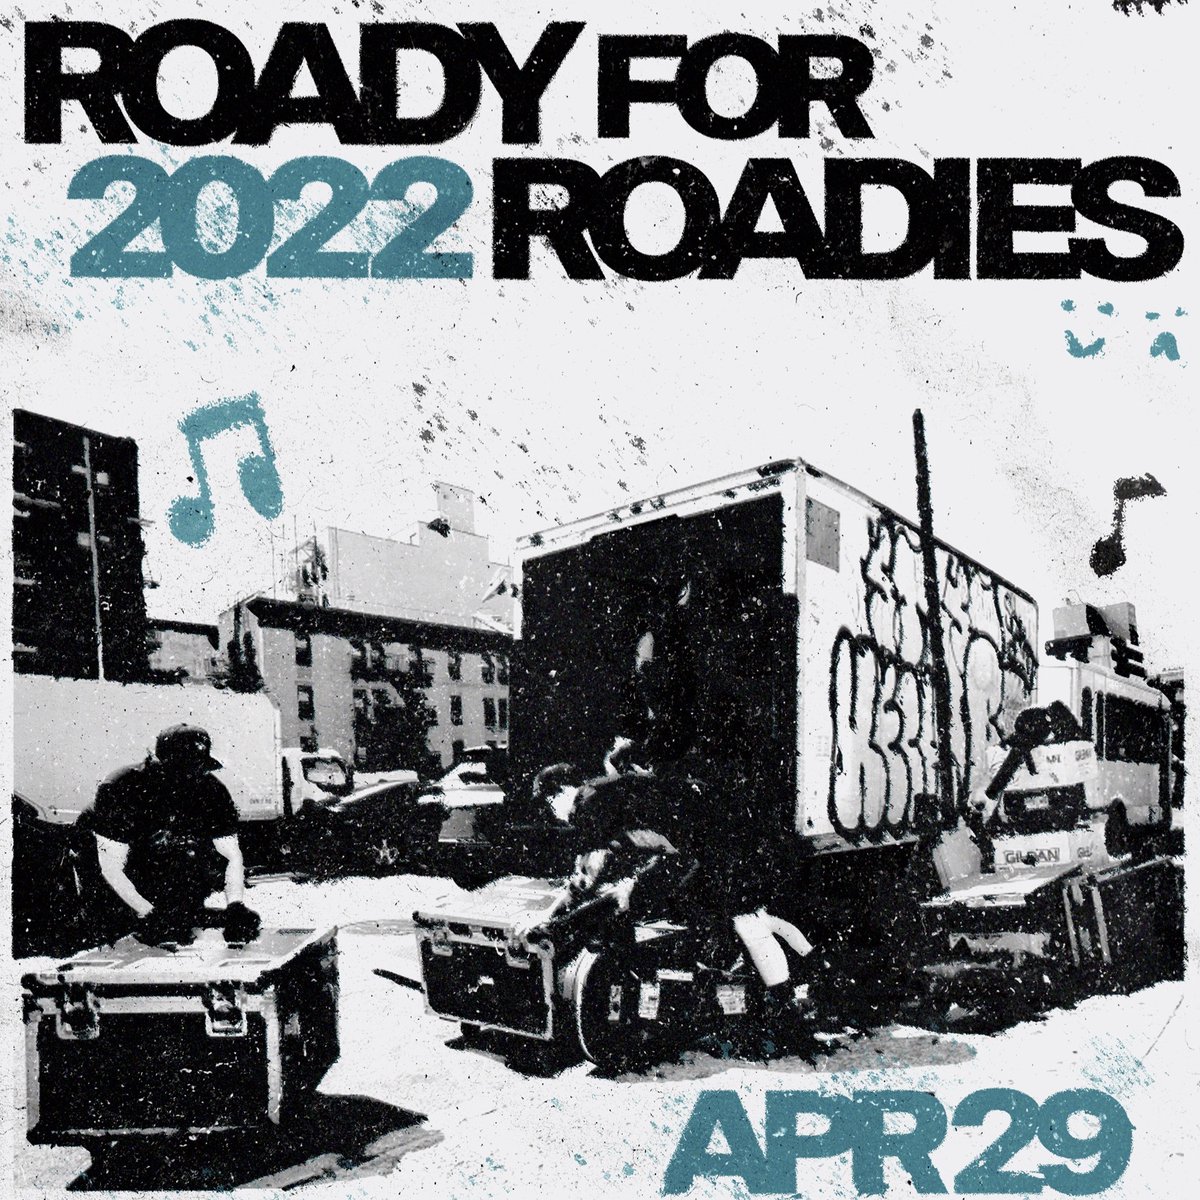 It's almost here. Weather report looks good. Sir Dave Dobbyn, Neil Finn, Hollie Smith, and others lending a hand. Tickets on sale now at Ticketmaster. Check out roadyforroadies.com Can’t make it to the event, make a donation at RoadyForRoadies GiveALittle page